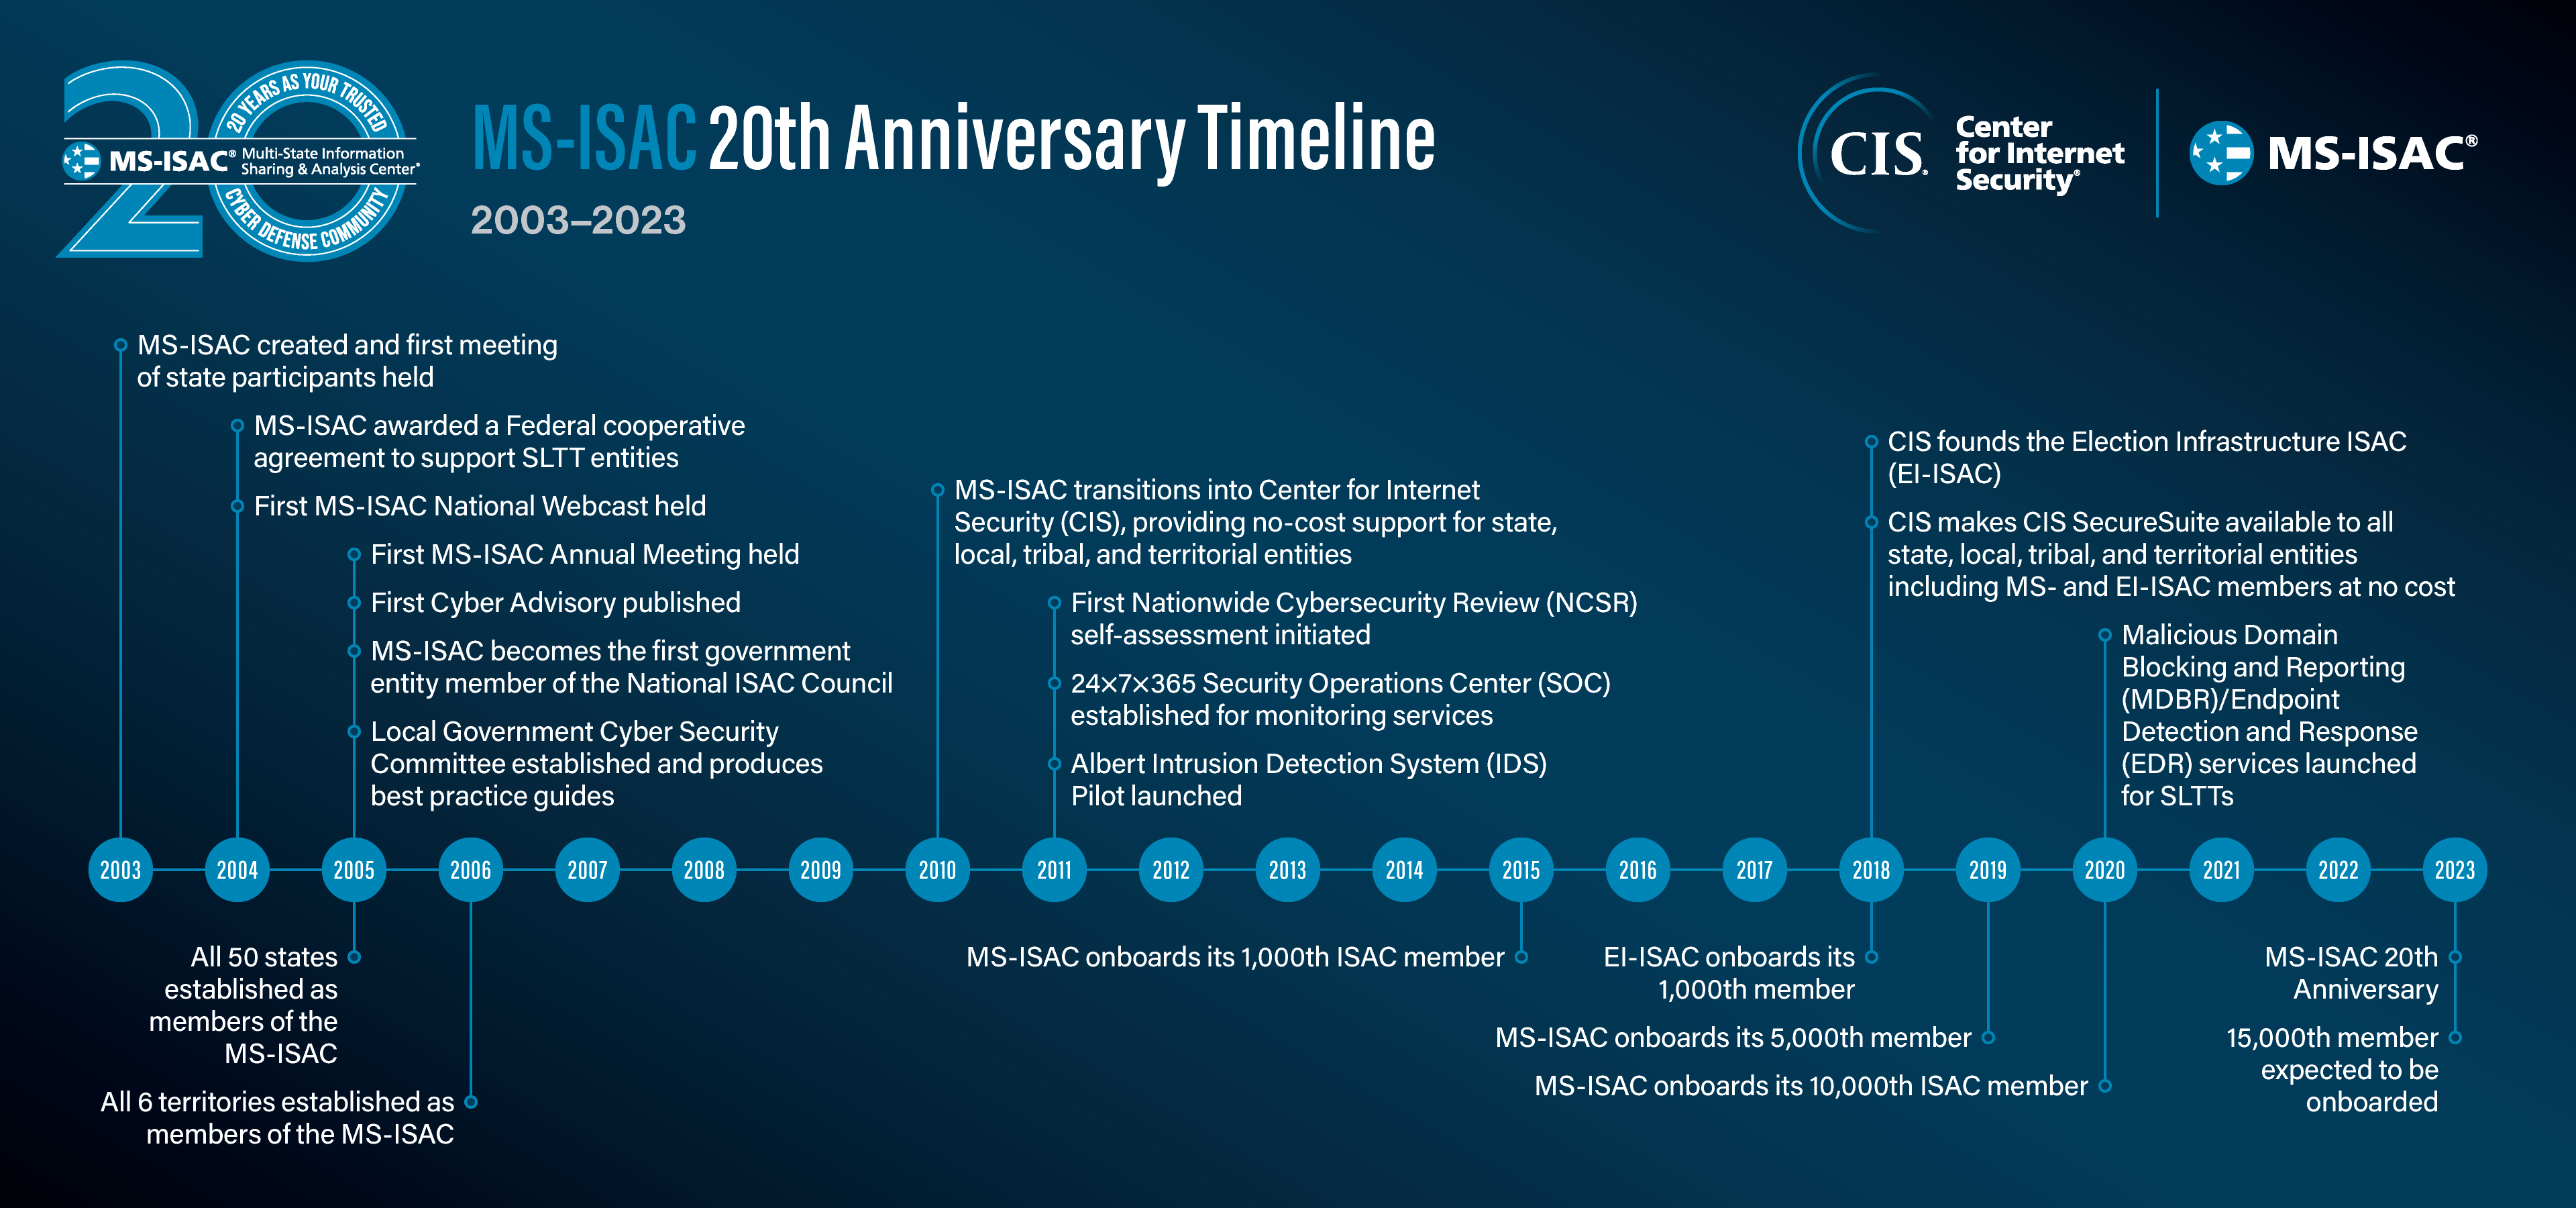 MS-ISAC 20th Anniversary timeline